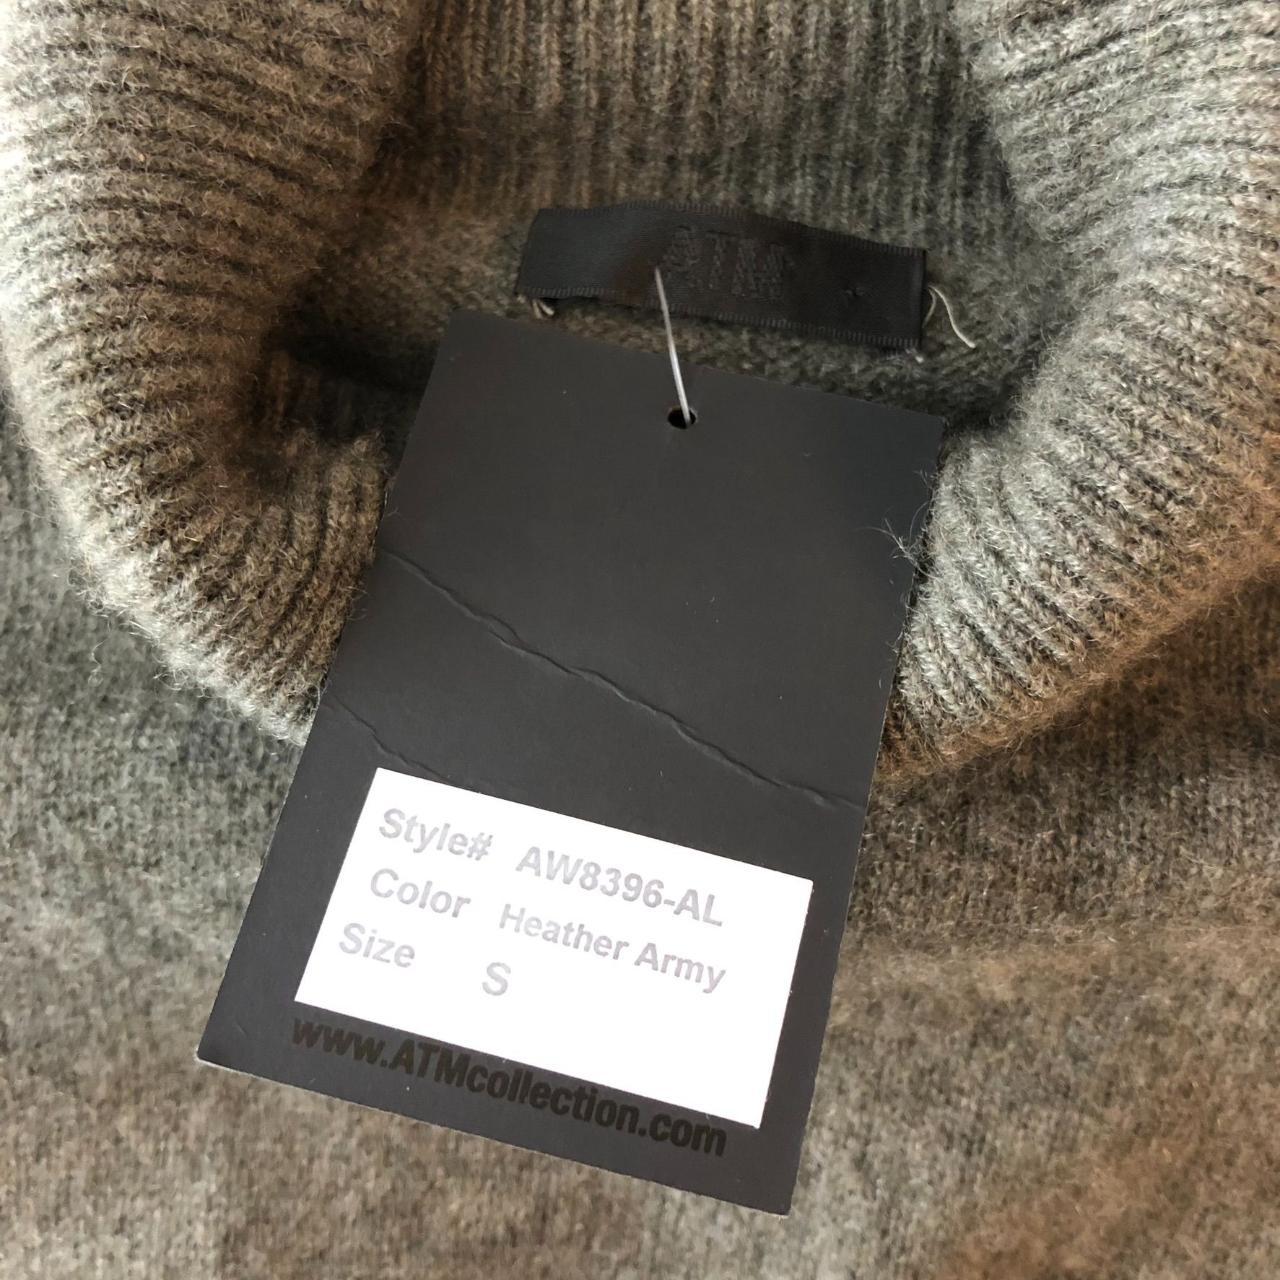 ATM Anthony Thomas Melillo | Recycled Cashmere Turtleneck Sweater - Heather Charcoal | S | Heather Charcoal